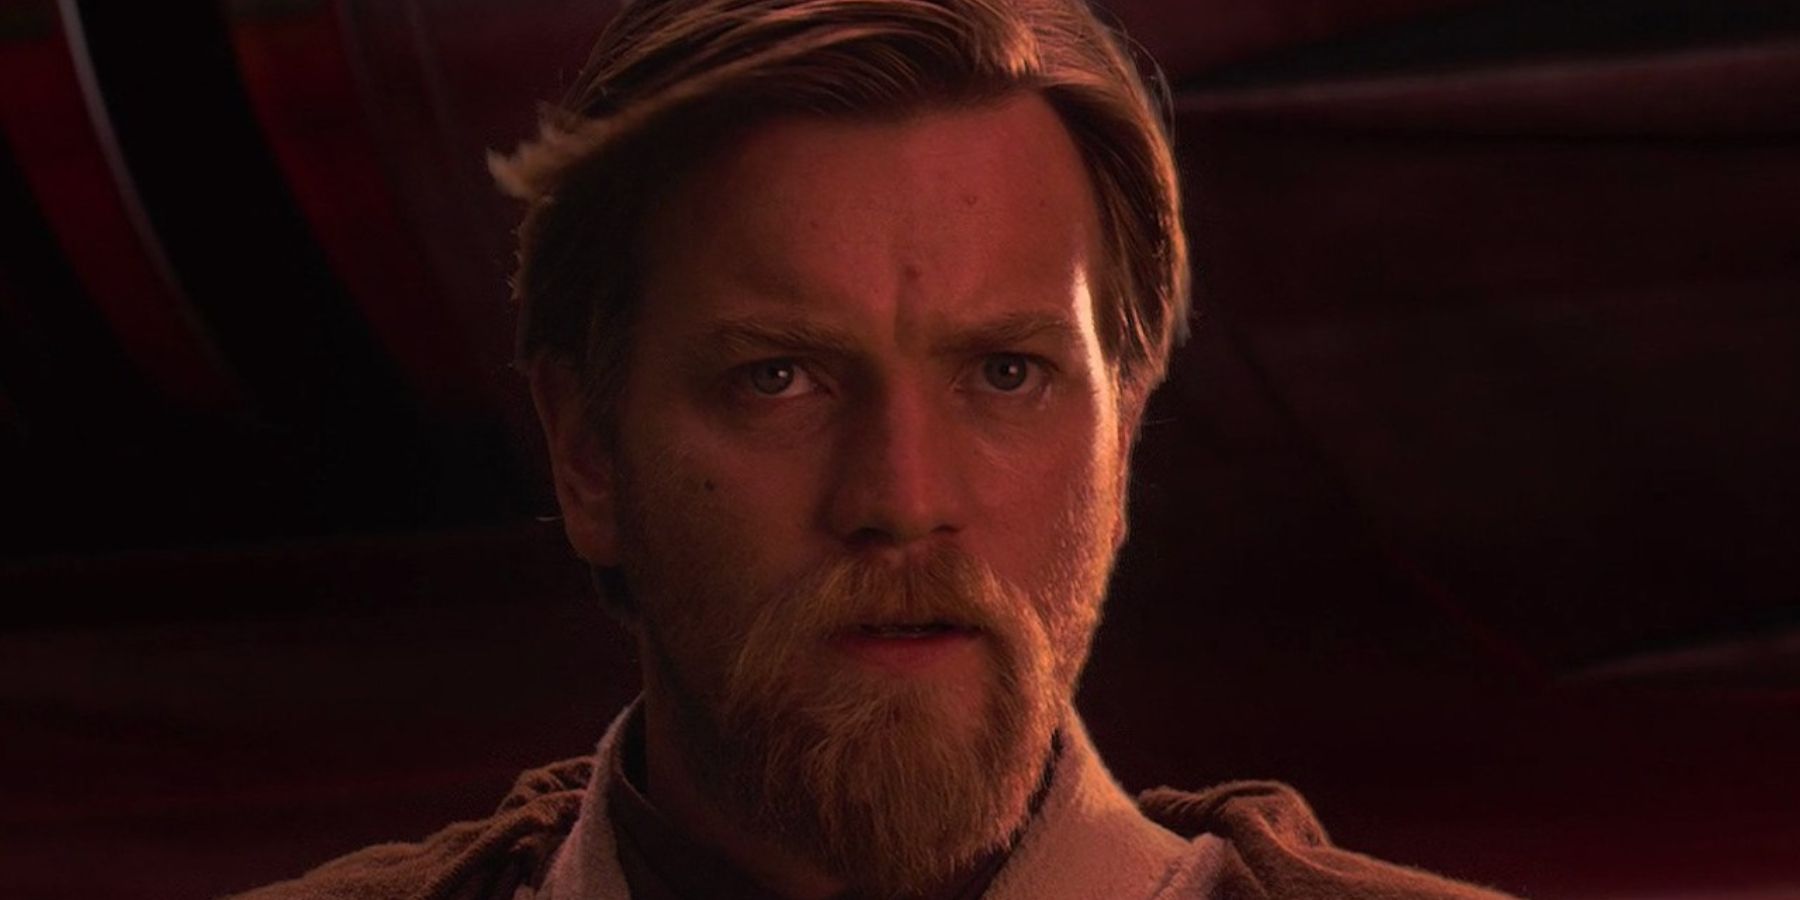 Obi-Wan confronts Anakin on Mustafar in Star Wars: Revenge of the Sith